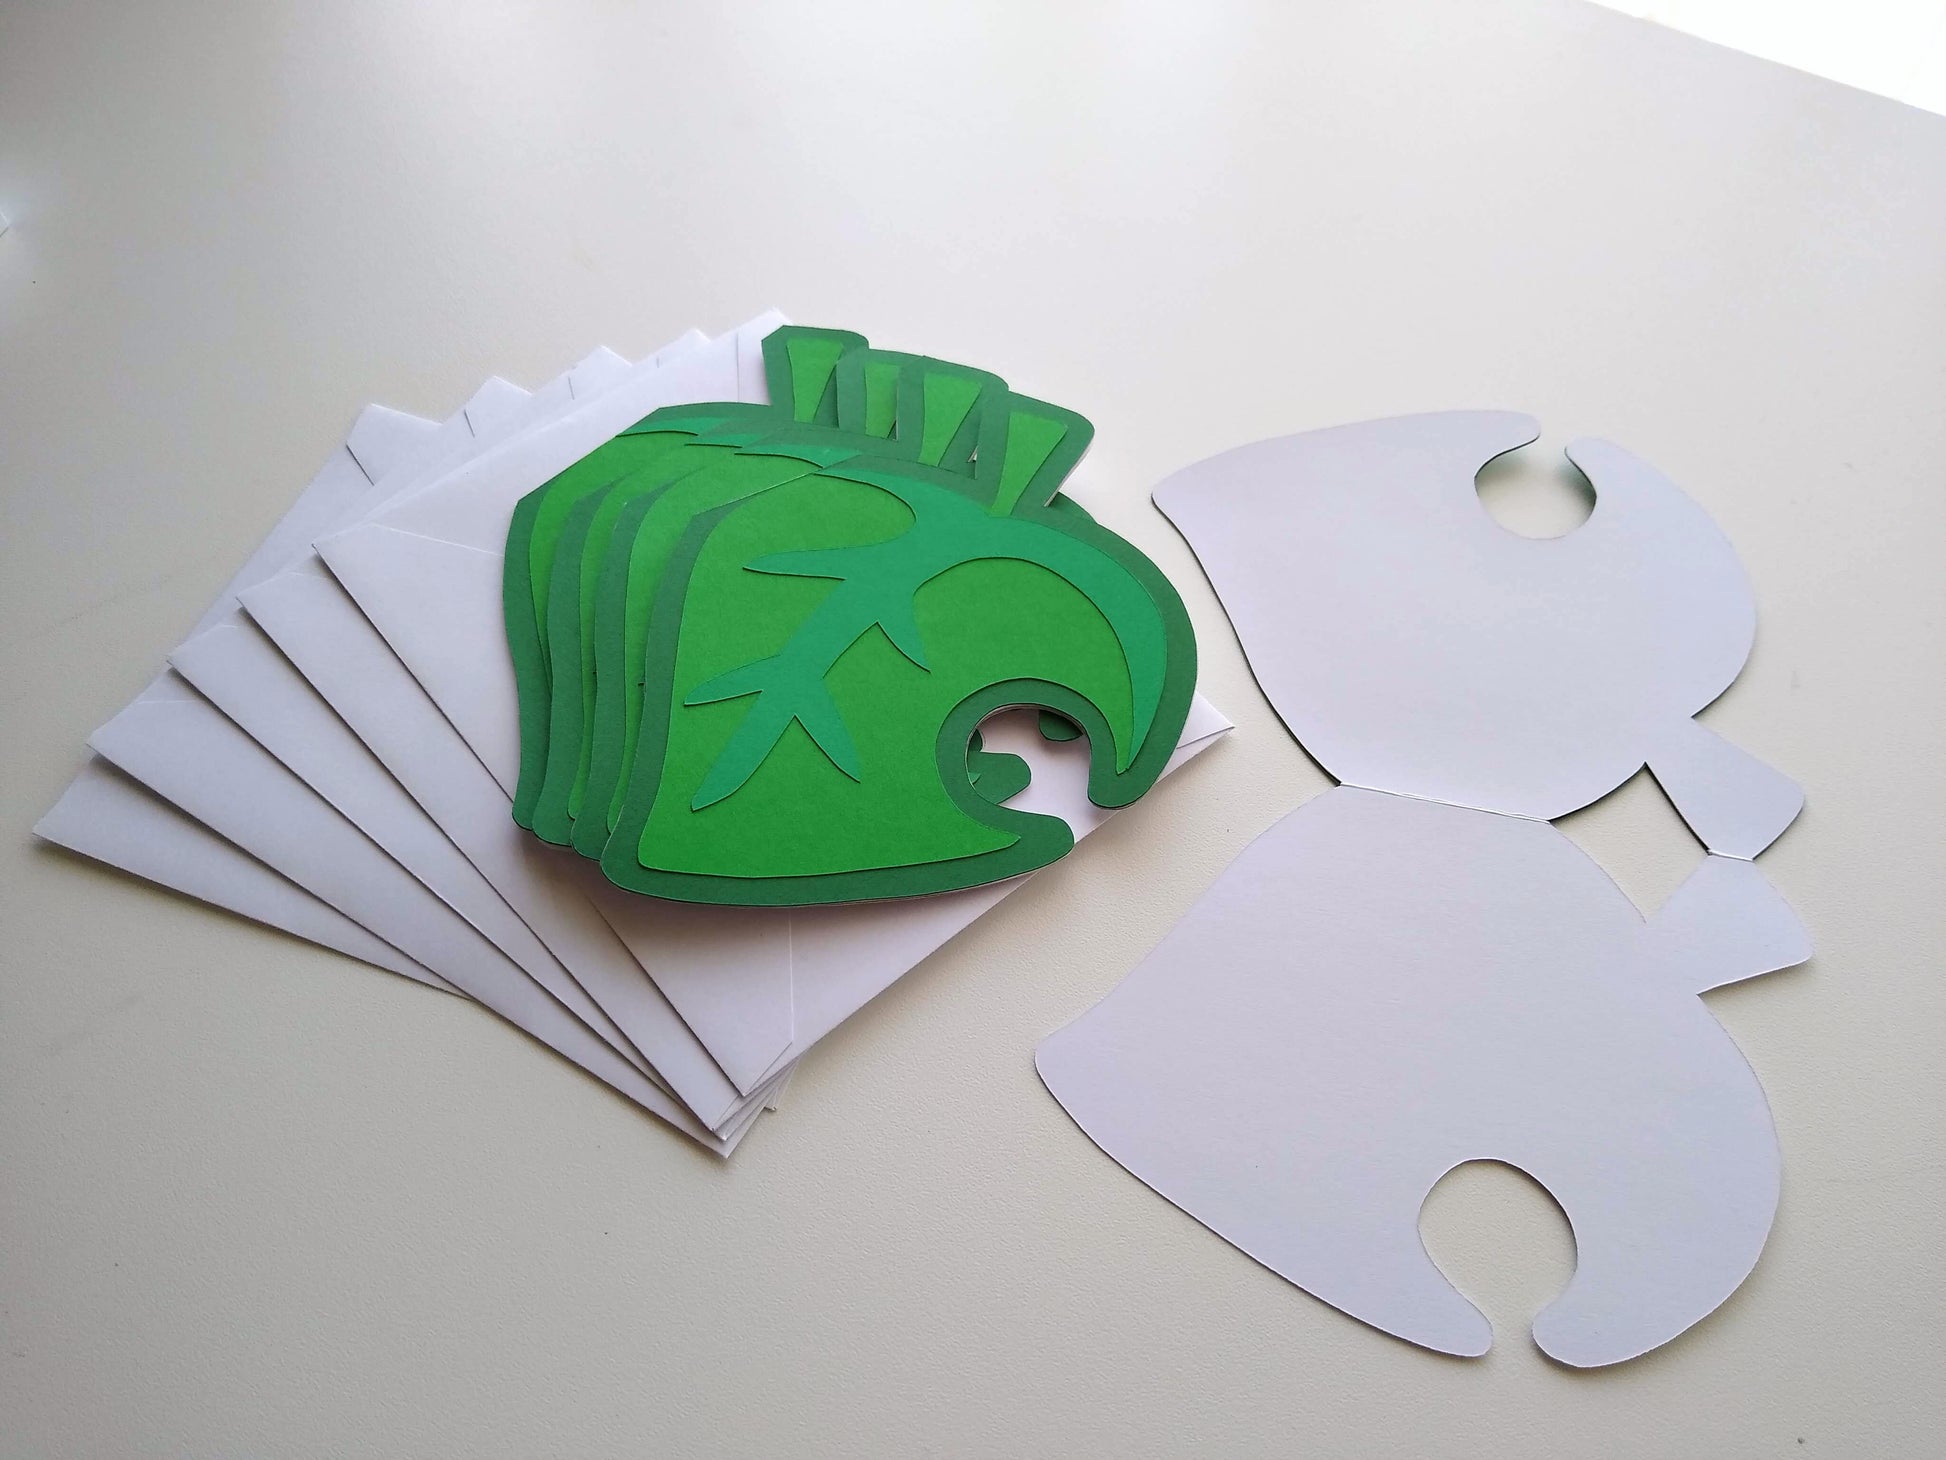 Four cards designed to look like green leaves with a hole in the side are stacked, splayed, on top of five white envelopes. One card is opened up flat on the table beside them.